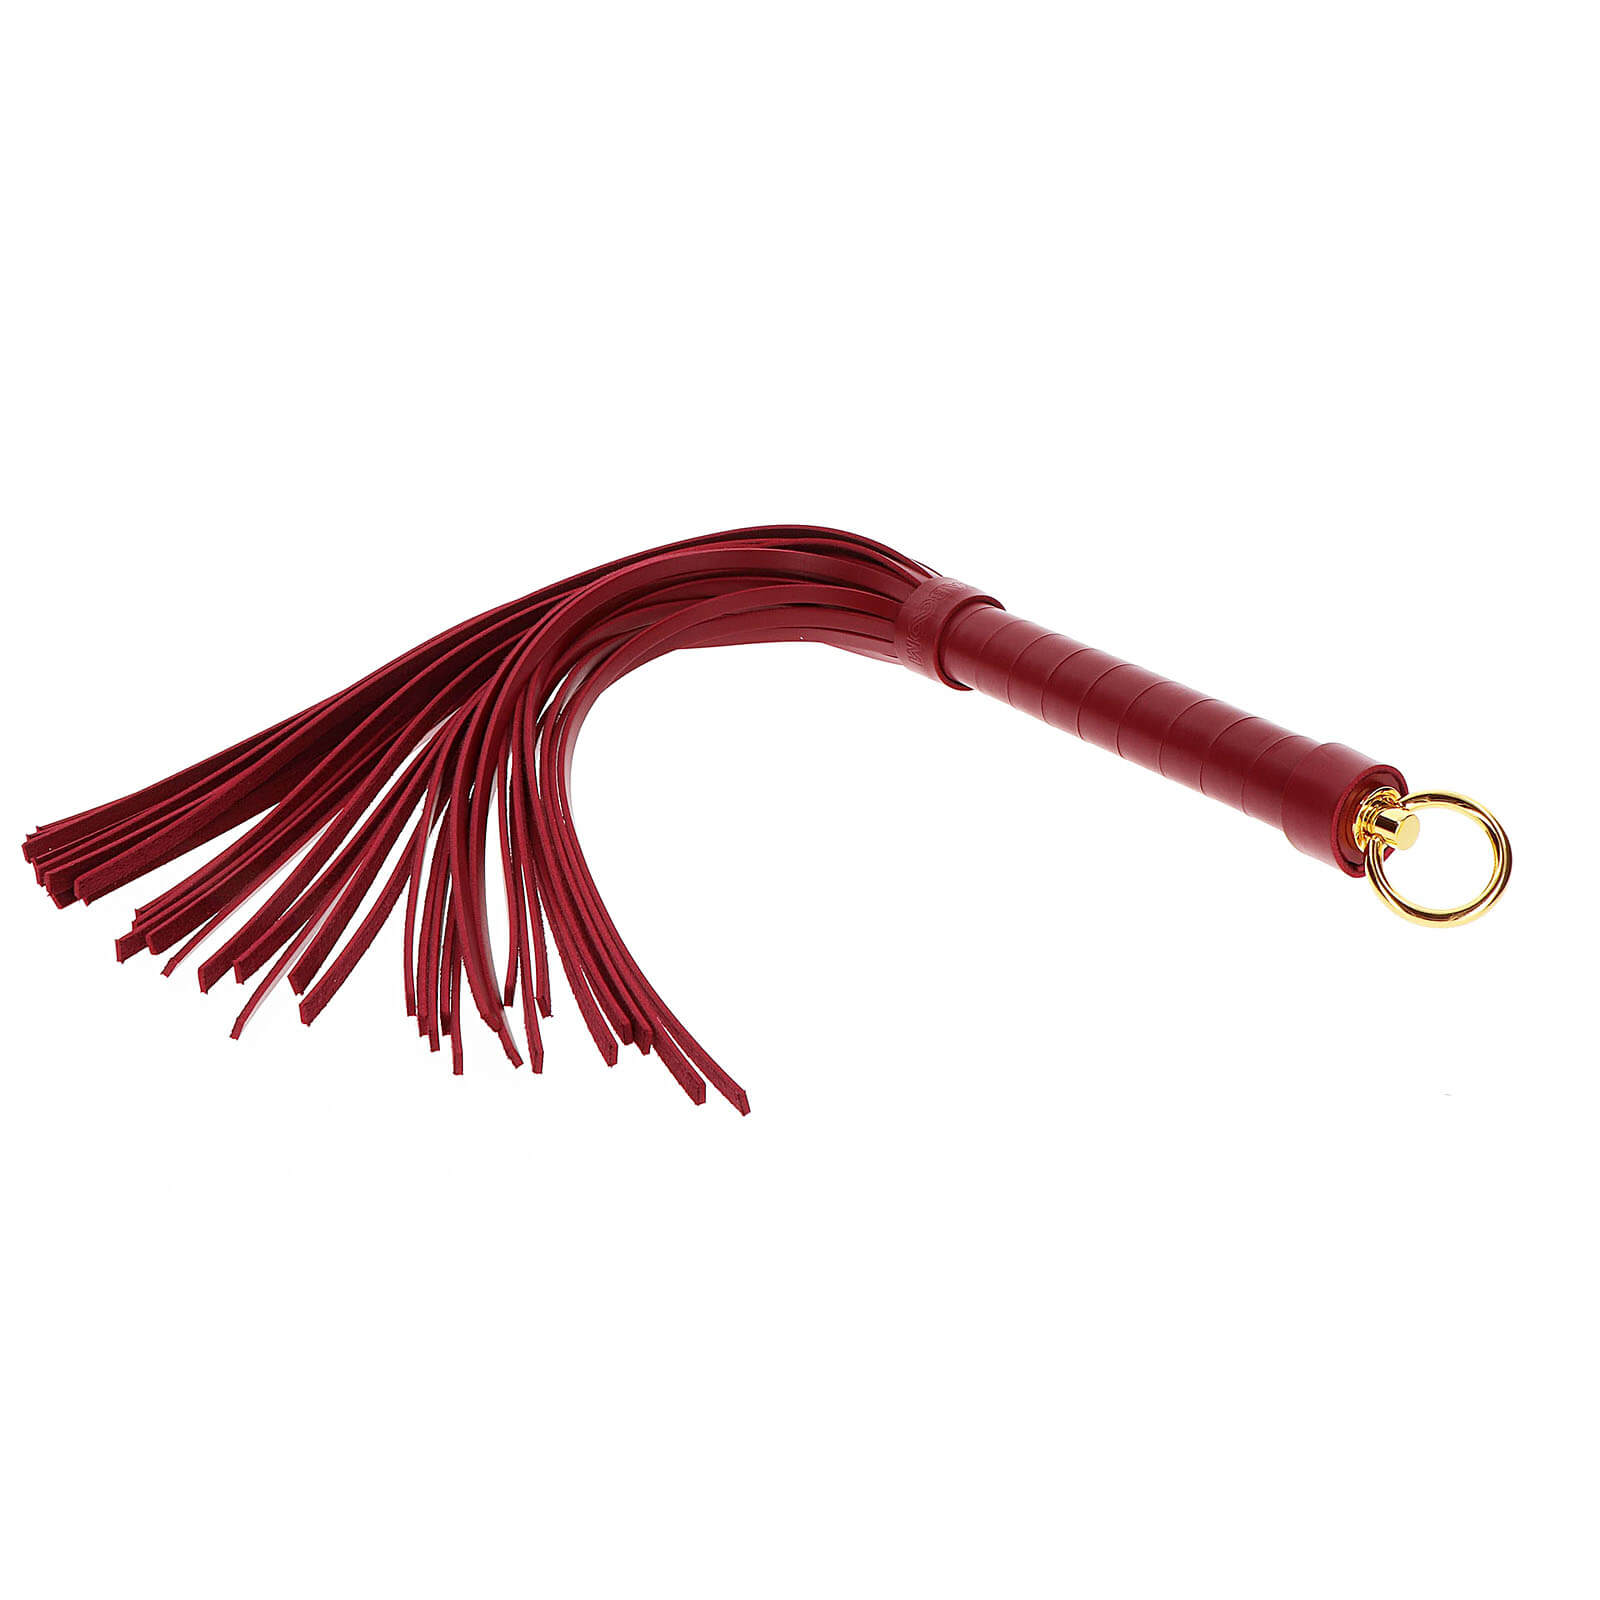 TABOOM Bondage In Luxury Large Whip (Red)